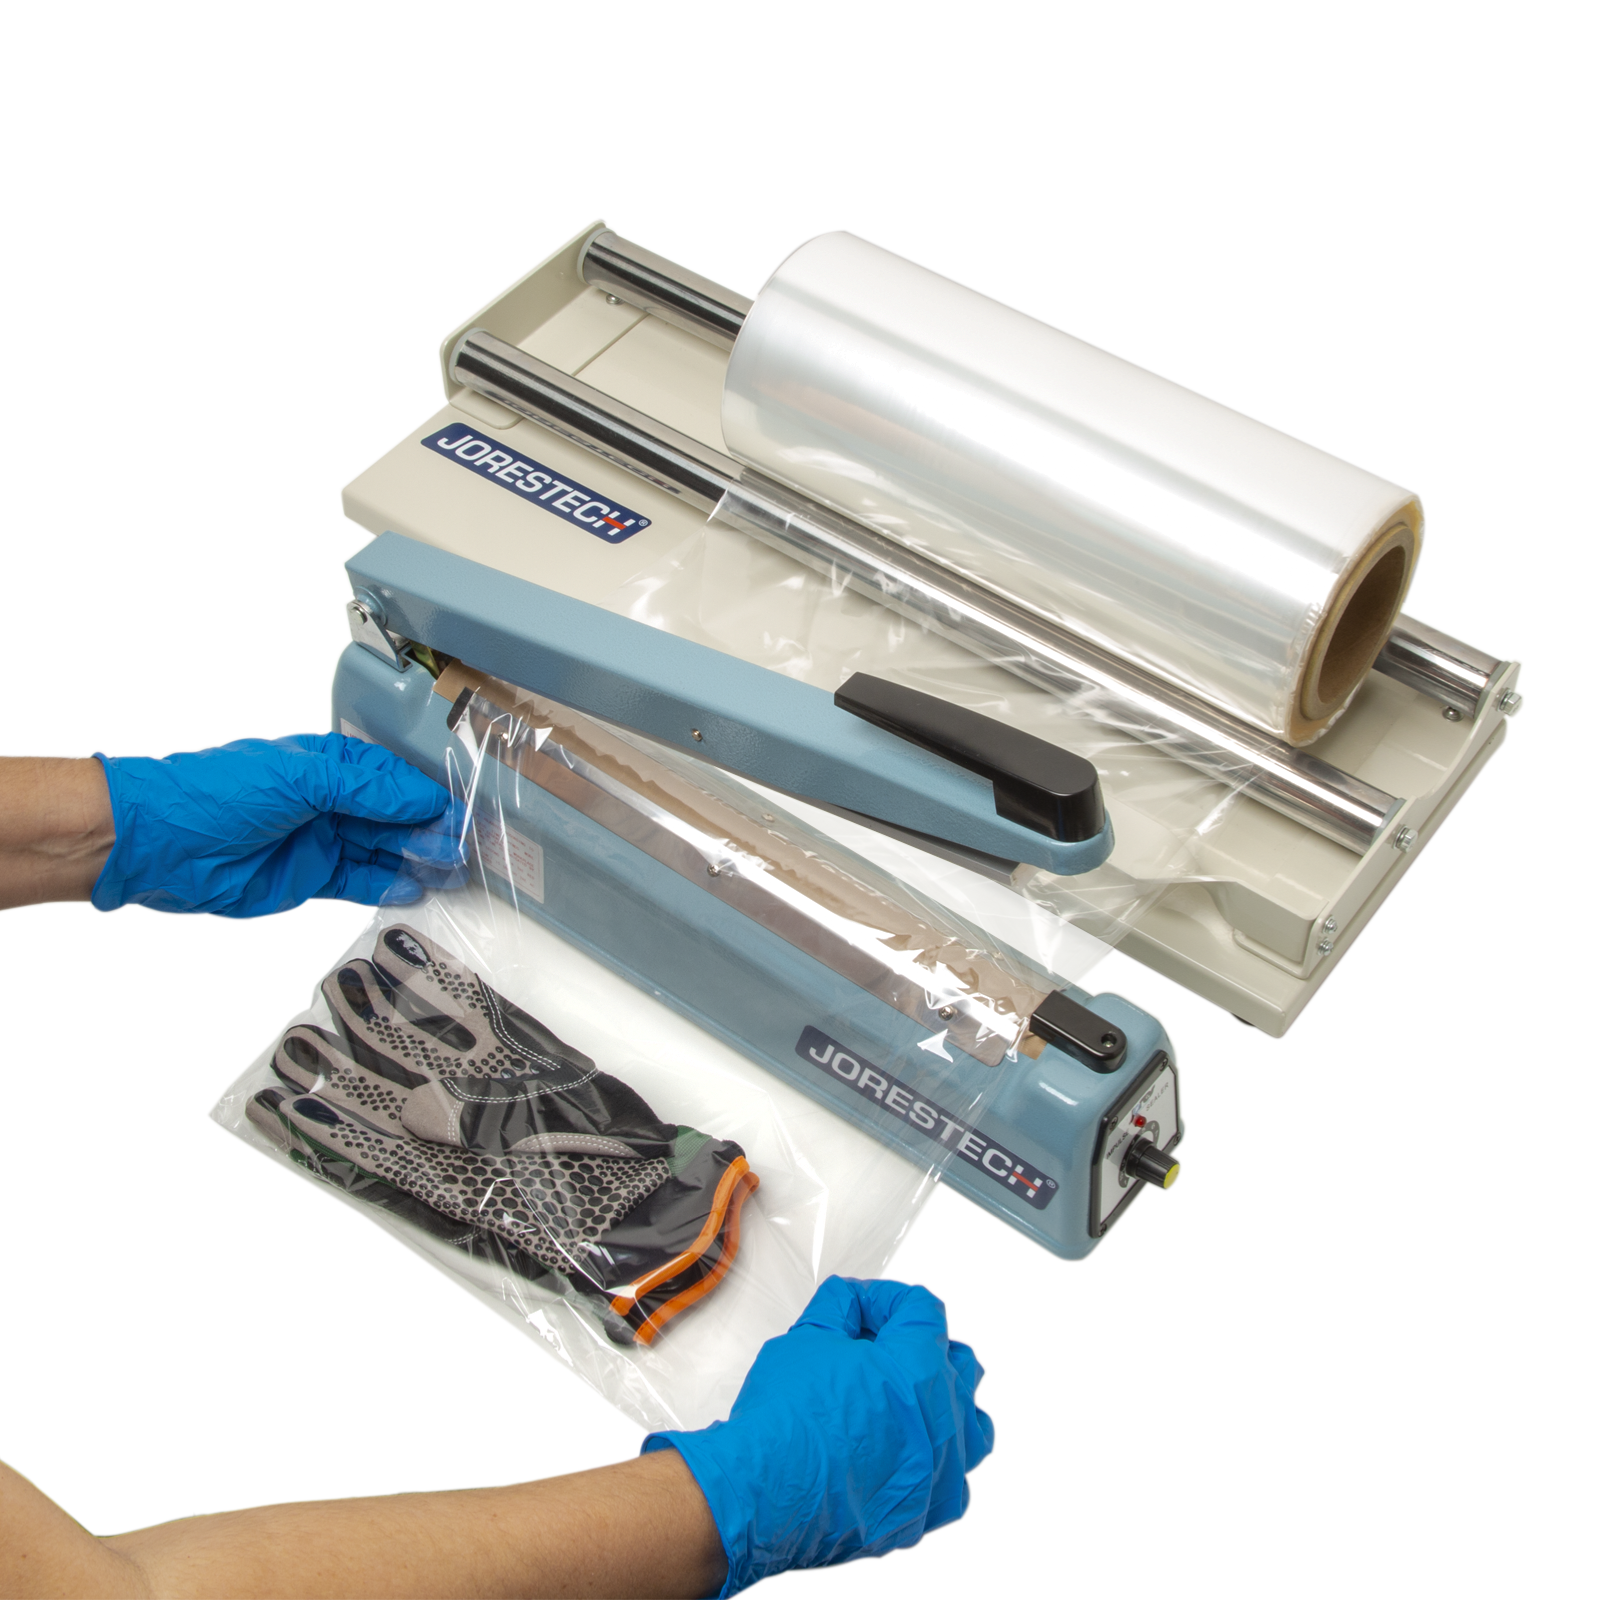 Person using the shrink wrap dispenser and a manual impulse sealer to make a bag to pack a pair of gloves